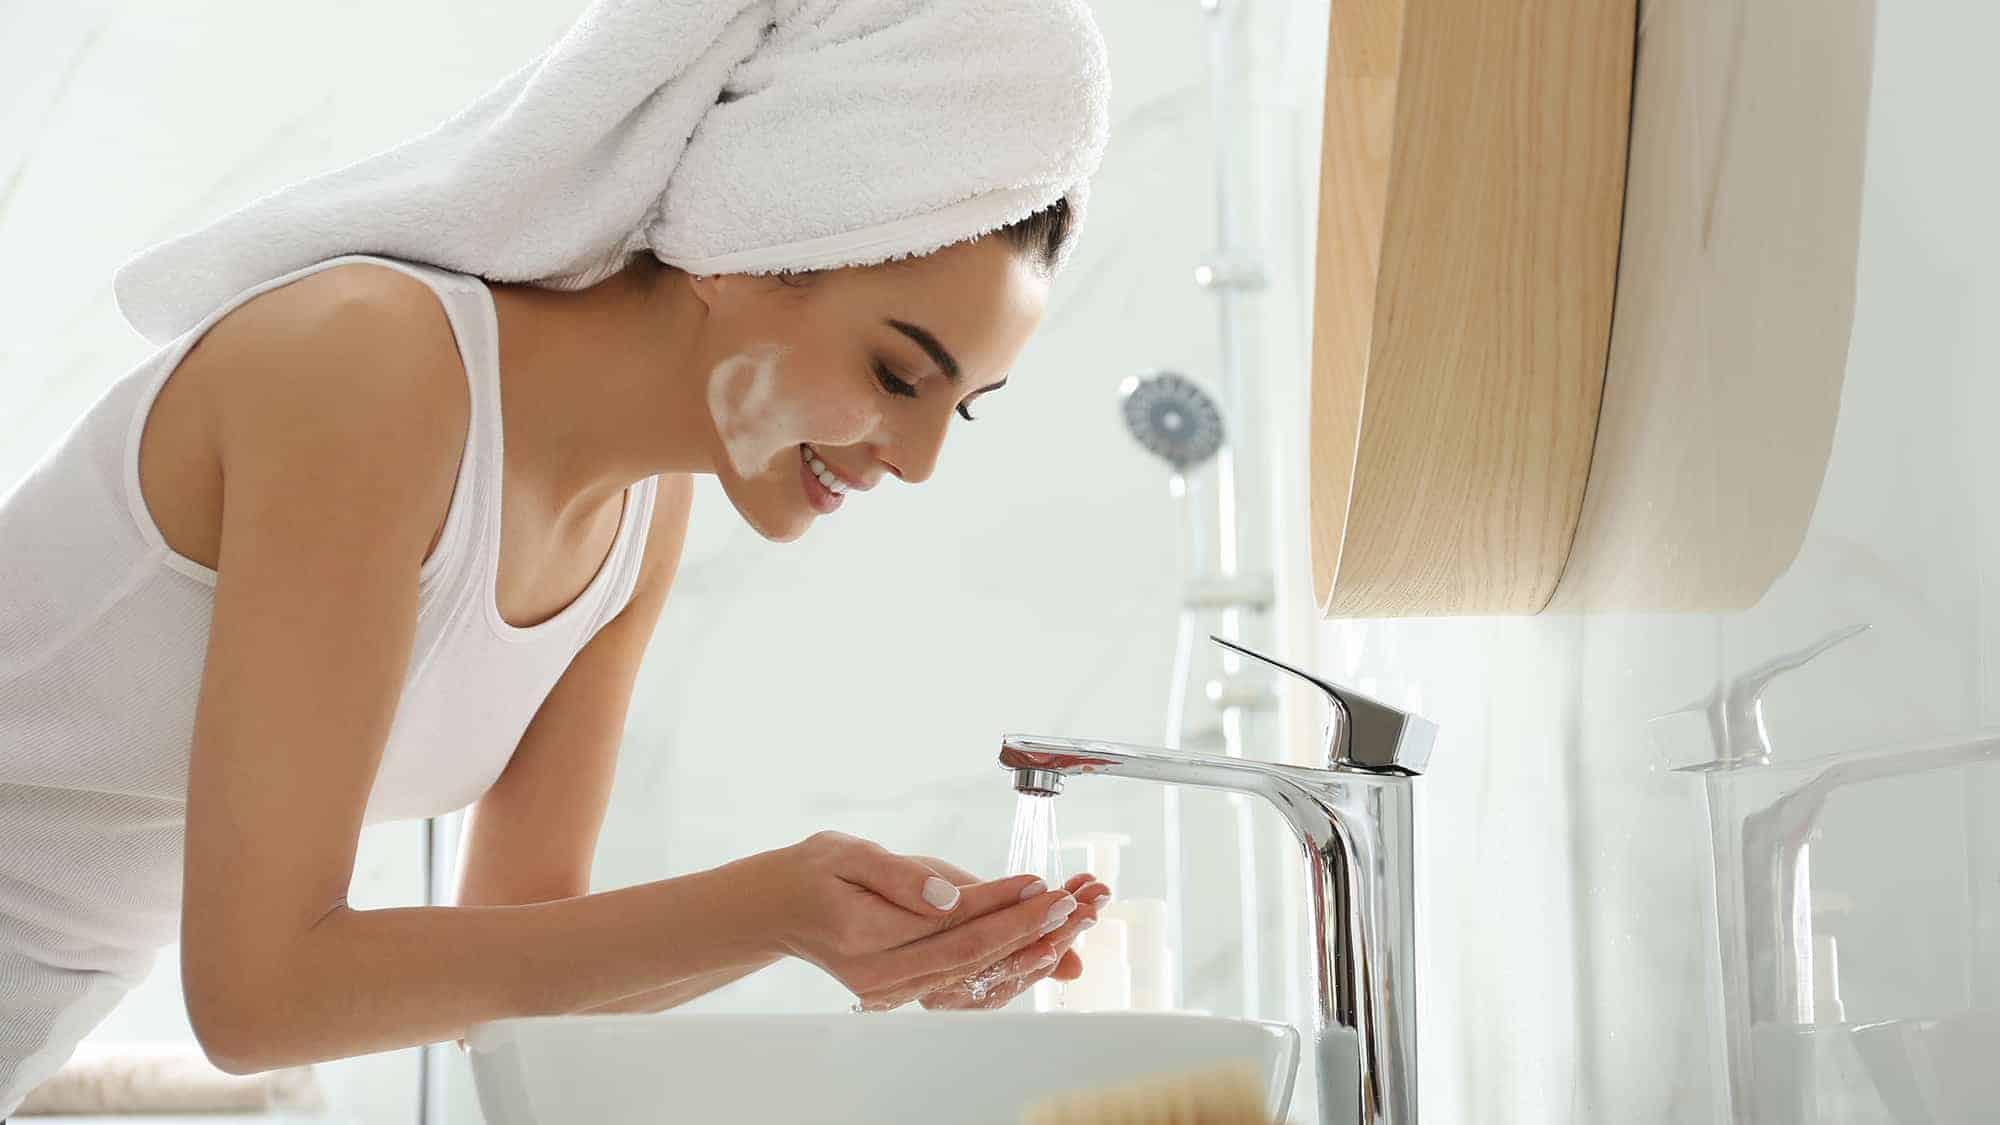 A Simple Skin Care Routine For Sensitive Skin